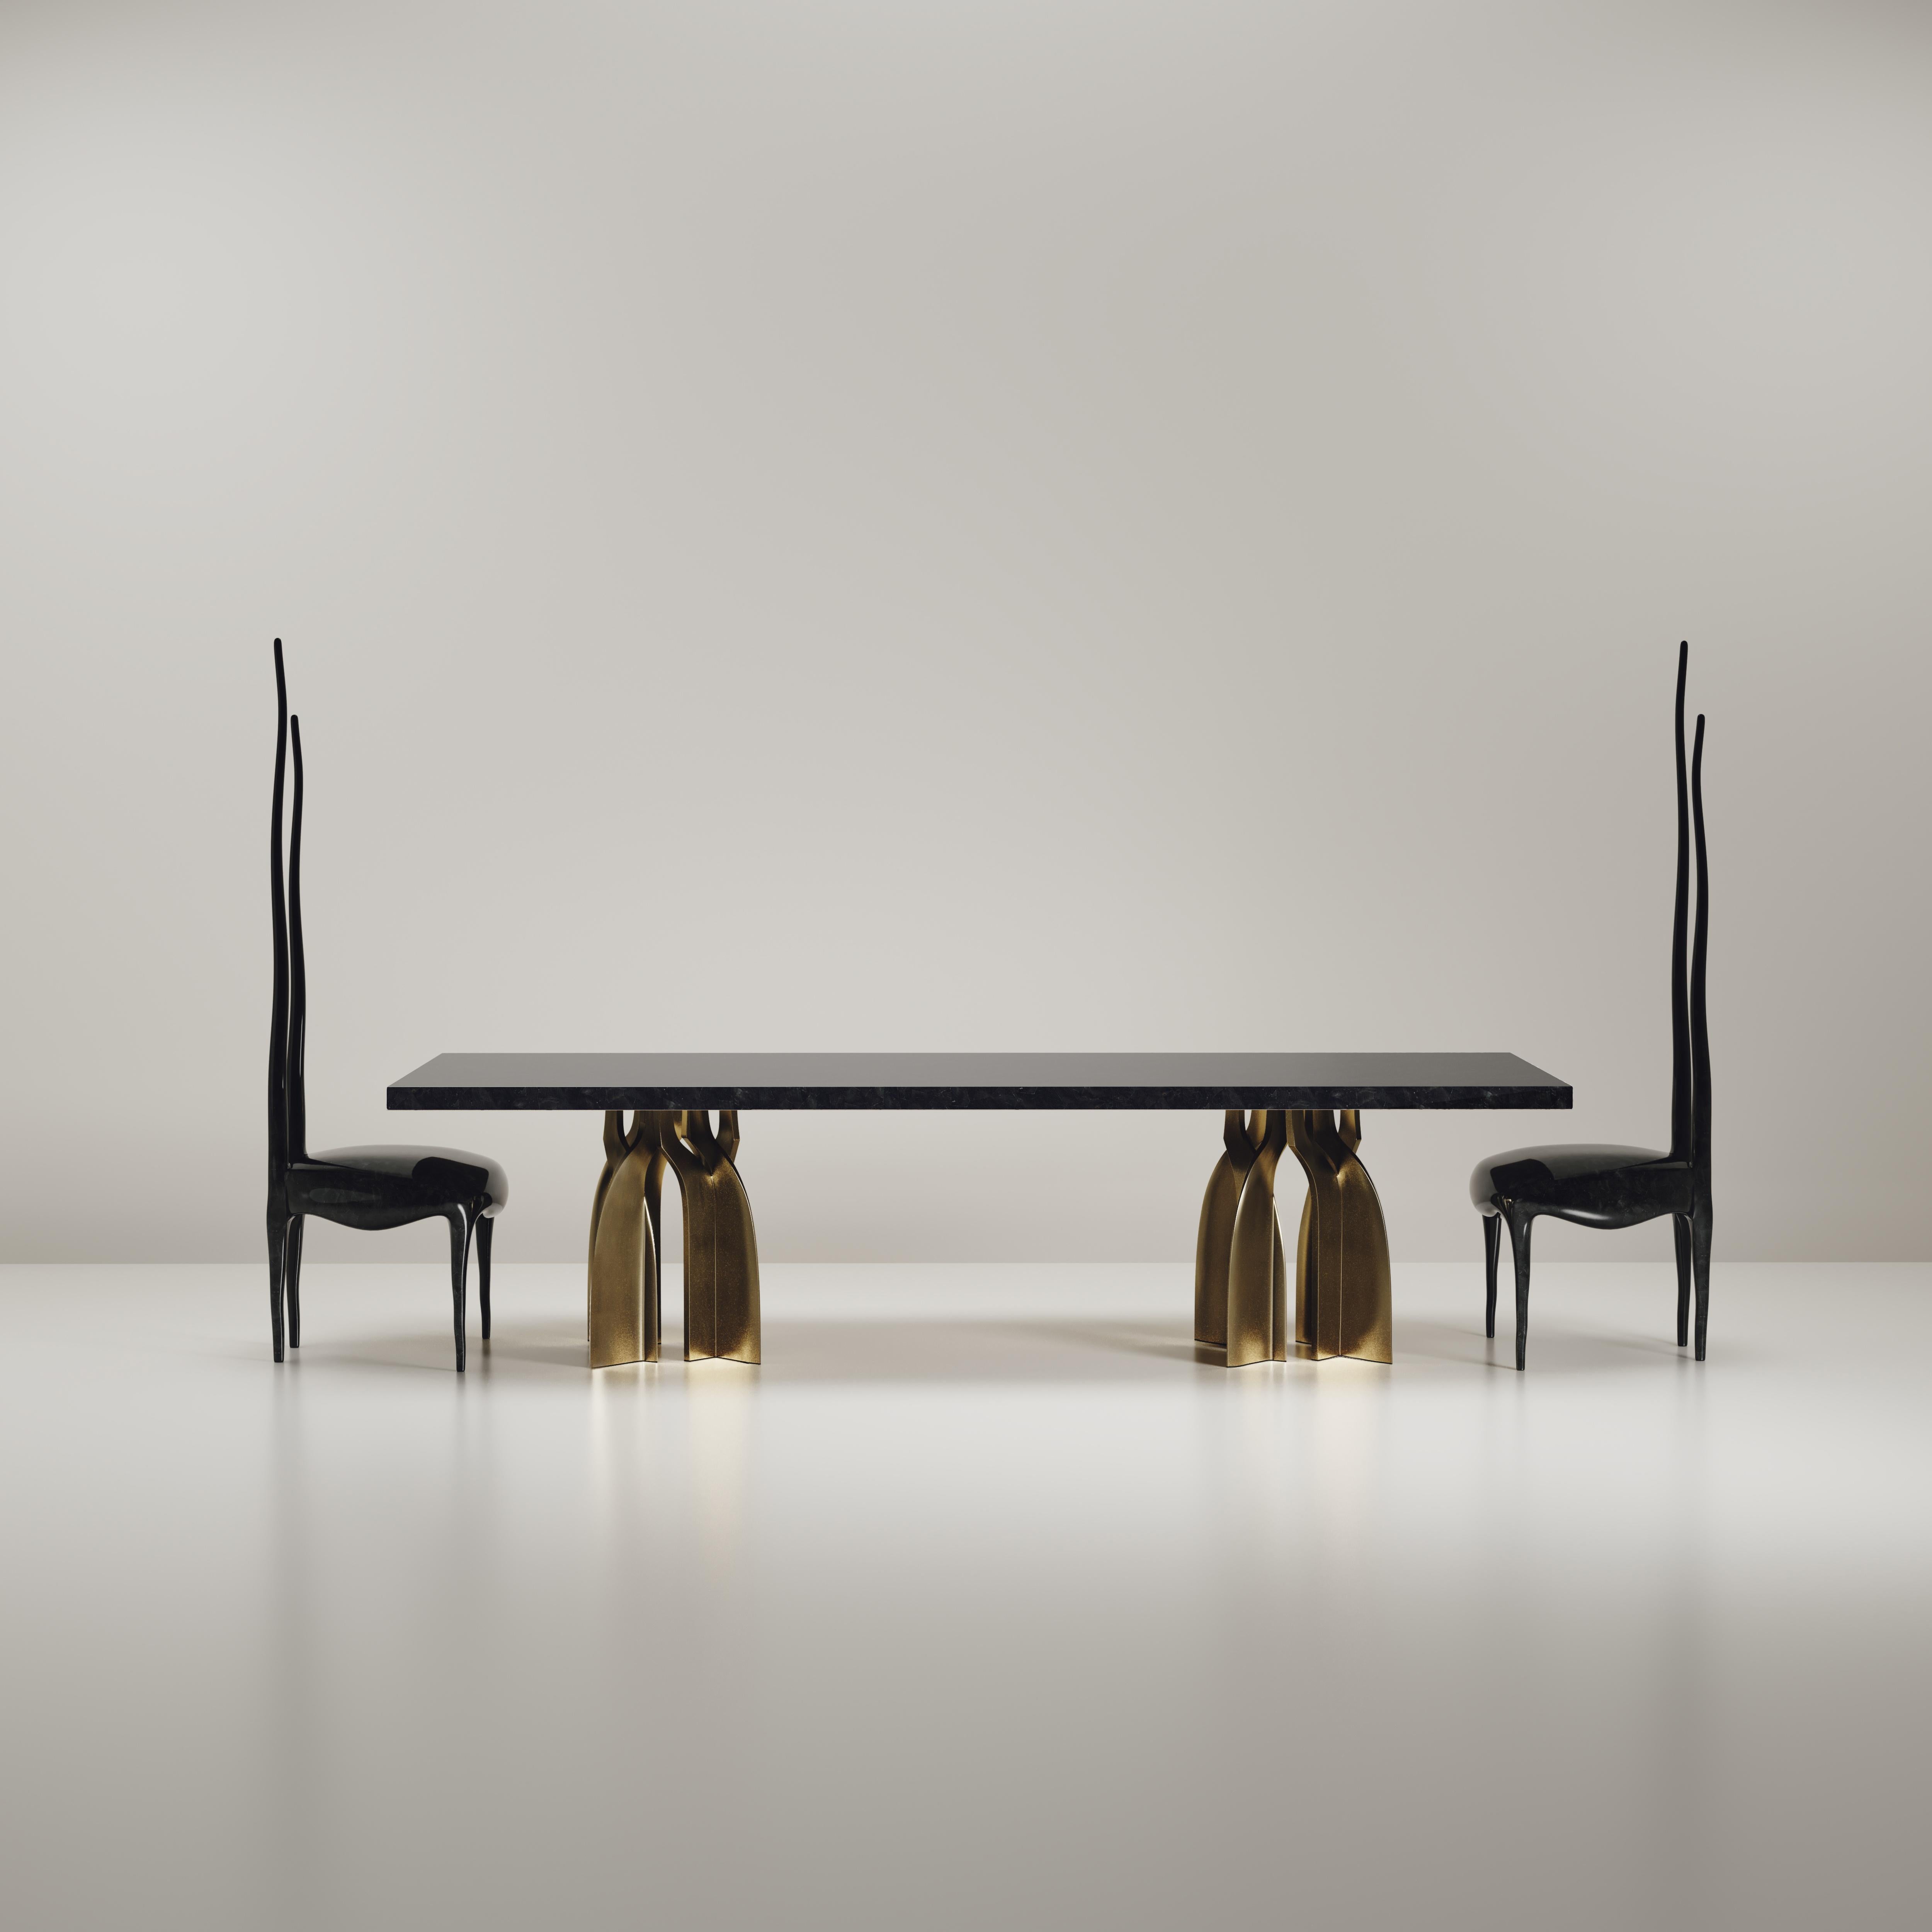 The Chital dining table is a stunning piece, a statement in any space. The black pen shell inlaid top is sleek and dramatic, and followed by bronze-patina brass sculptural legs clustered together as the base. This piece is designed by Kifu Augousti,